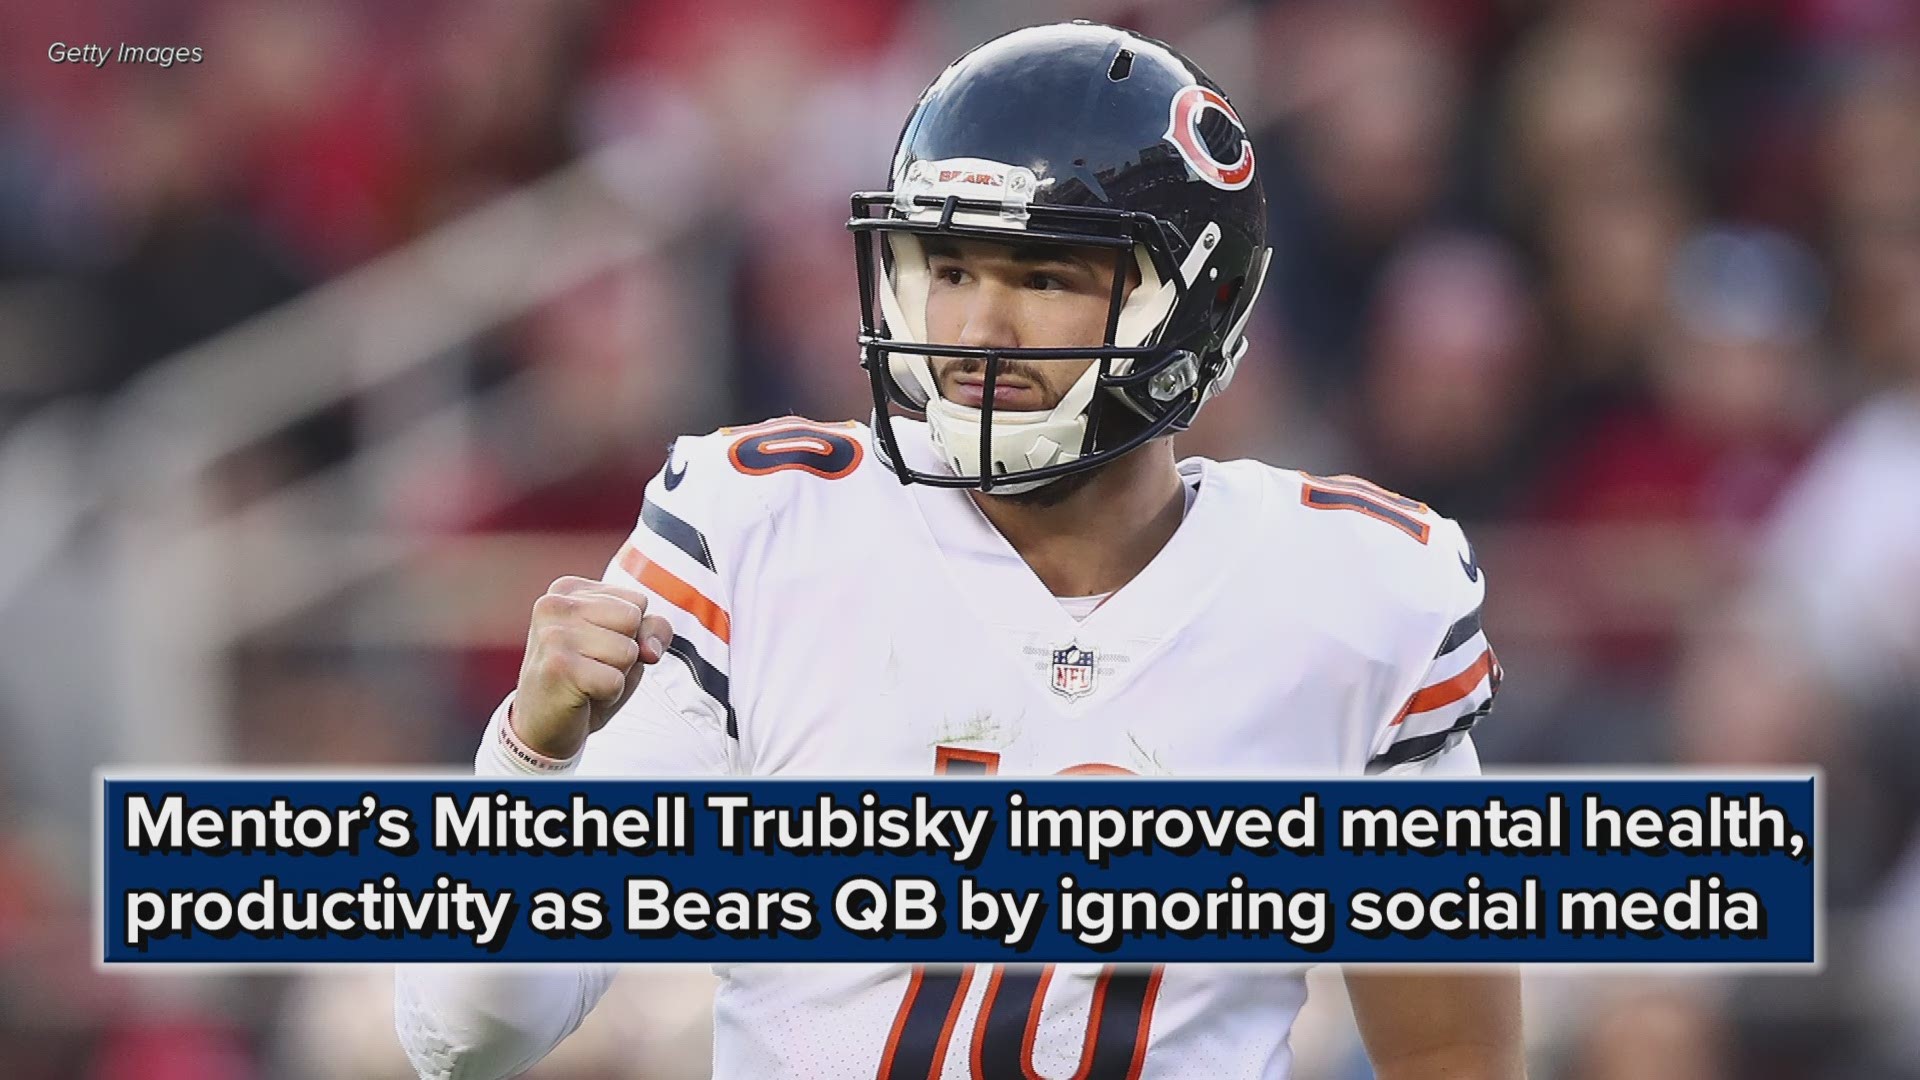 Chicago Bears quarterback Mitchell Trubisky, a native of Mentor, Ohio, improved his mental health and productivity by ignoring social media in 2018.